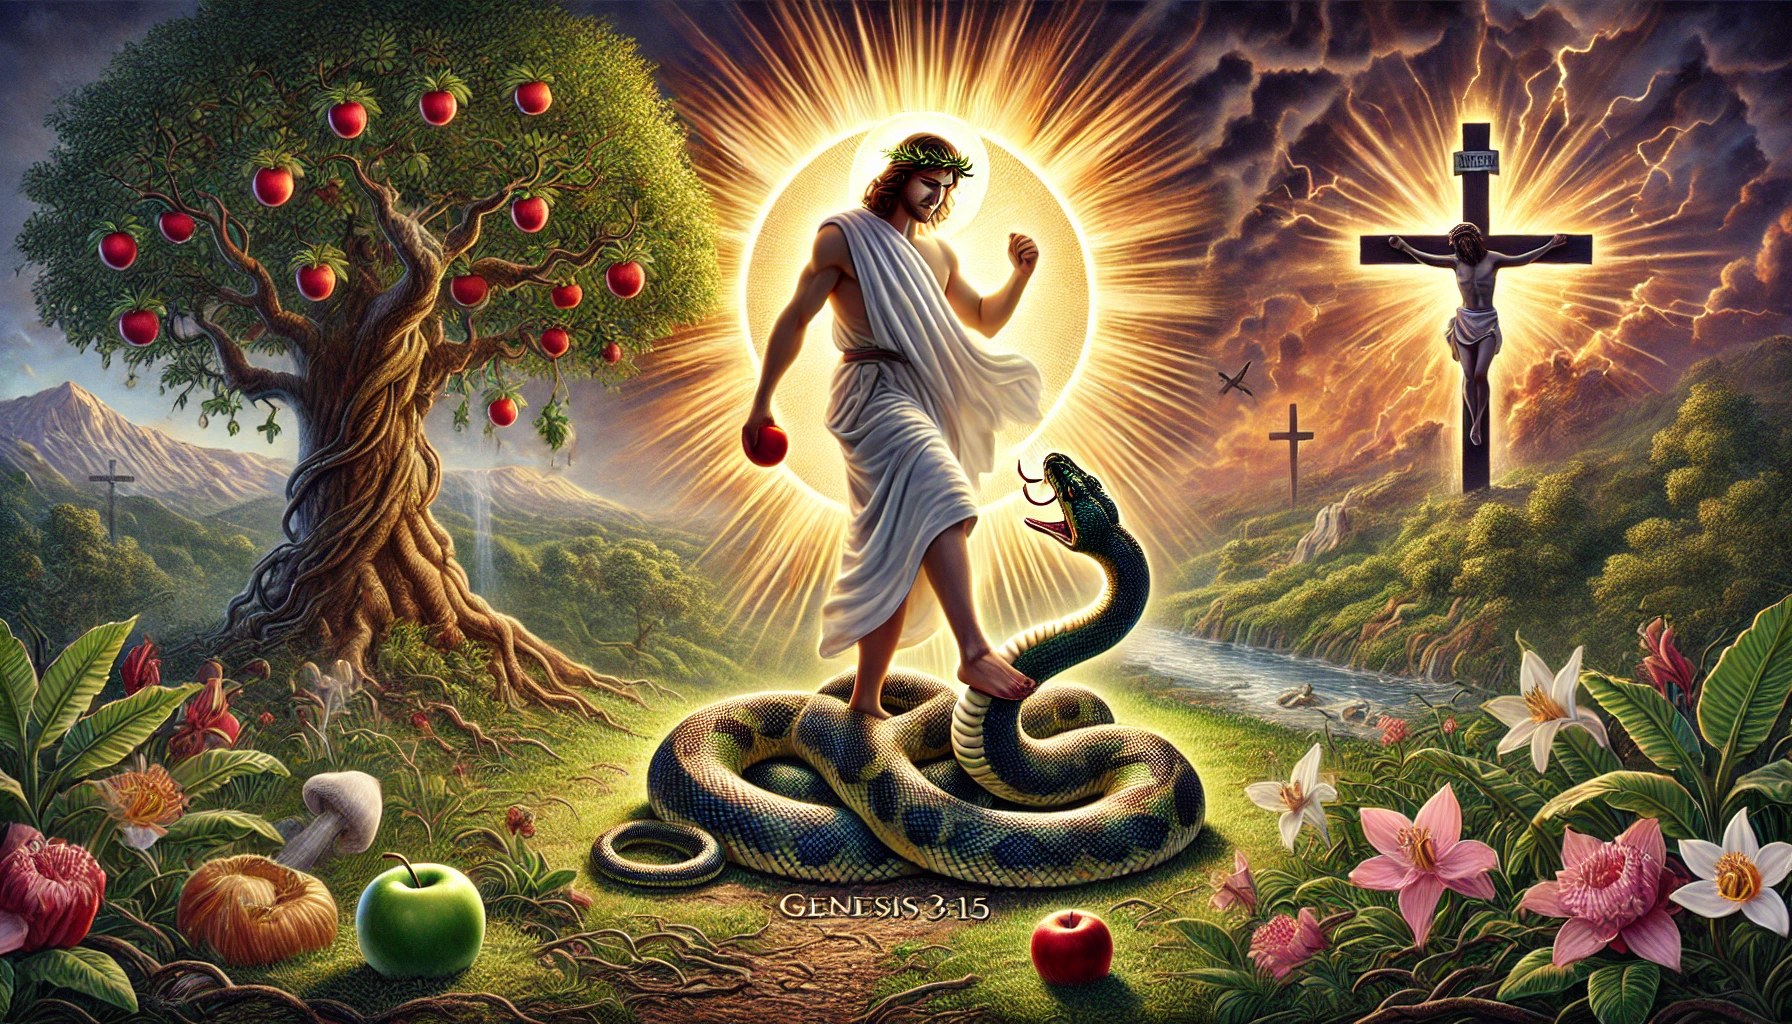 A symbolic image illustrating Genesis 3:15 with a serpent and a woman standing opposite each other. The woman is accompanied by a radiant figure (representing Jesus) who is crushing the serpent's head with His foot. The serpent is striking at the heel of the radiant figure. The background features a lush garden with a tree of knowledge, an apple, and a distant cross to signify the crucifixion. The scene is bathed in a mix of light and shadow to emphasize the struggle between good and evil. The image should have a hopeful and victorious tone.